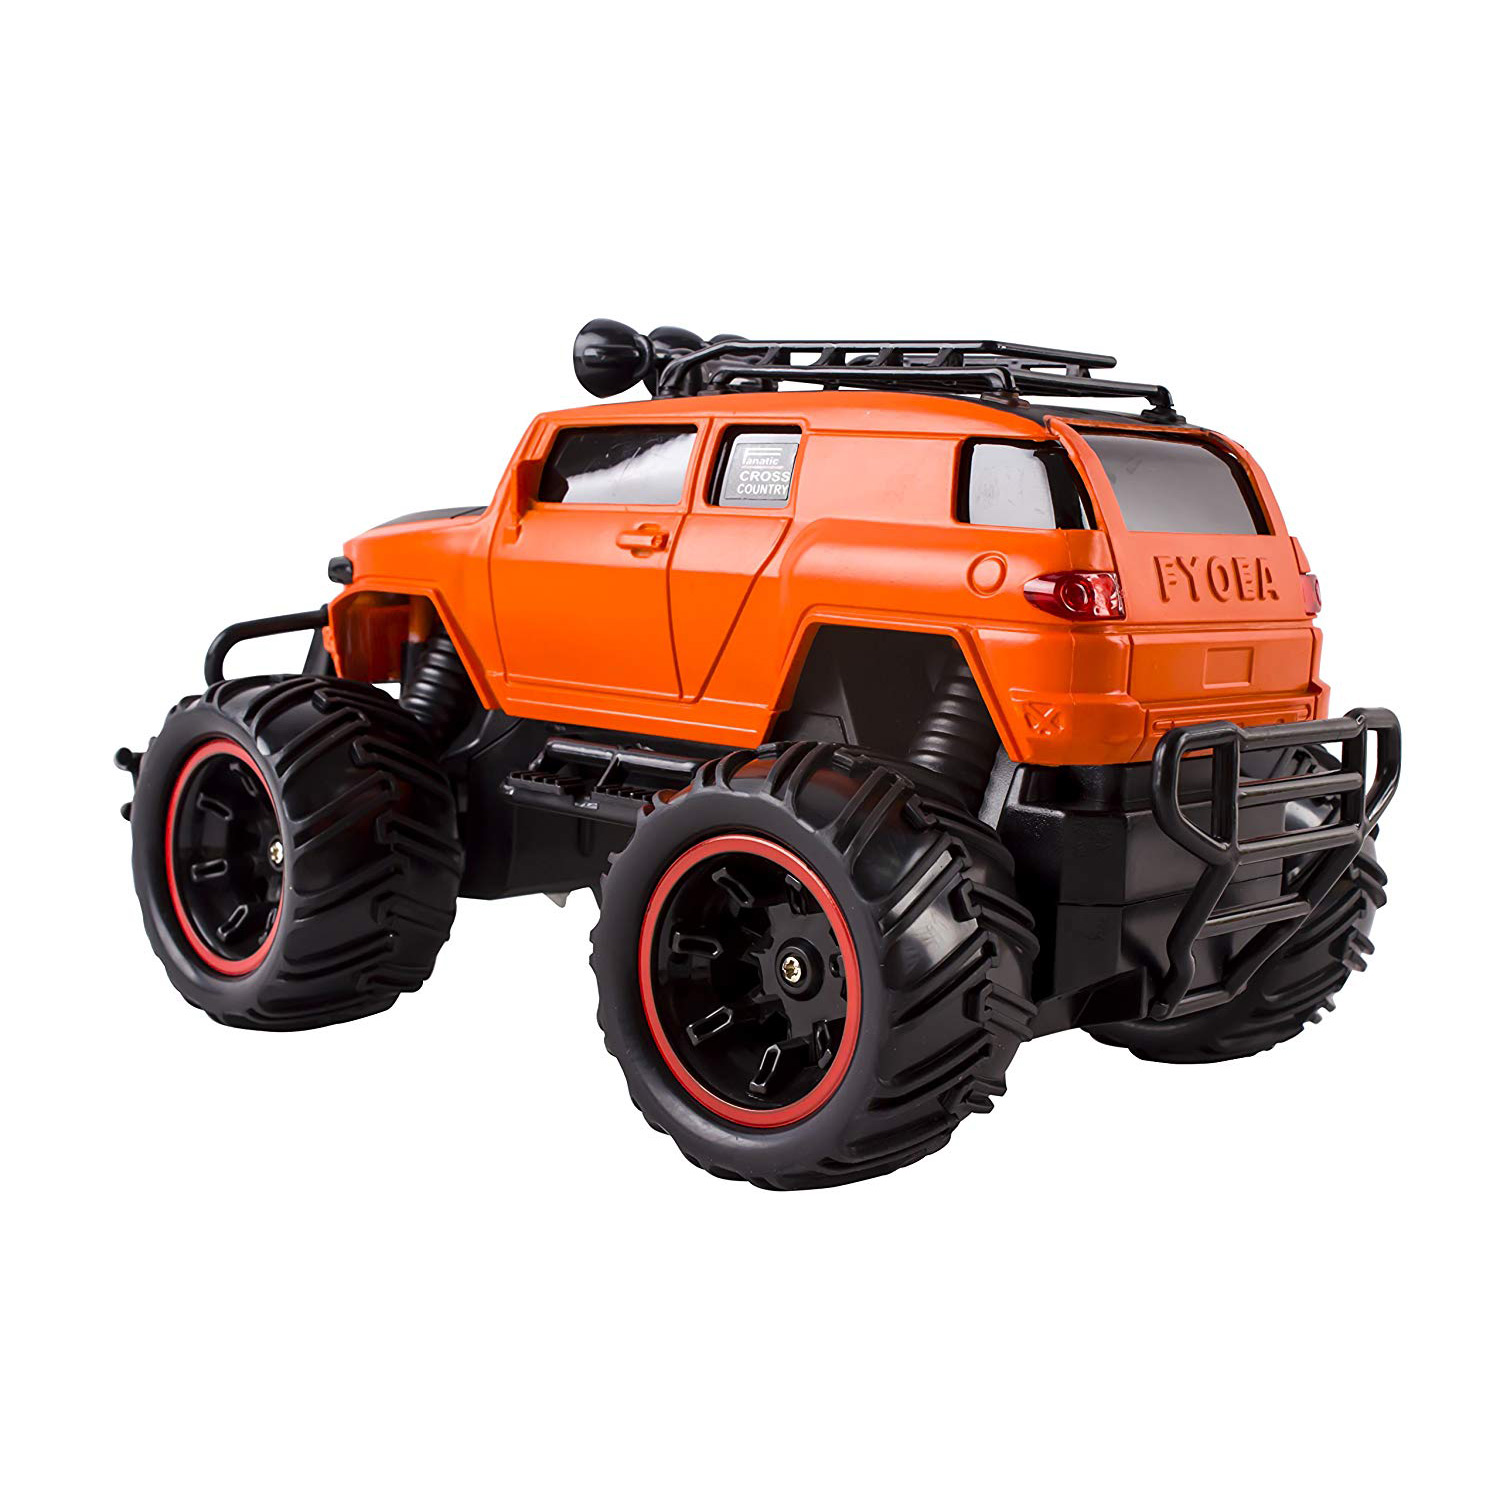 RC Monster Truck Toy Remote Control RTR Electric Vehicle Off Road High Speed Race Car 120 Scale Radio Controlled Orange Color 666-XC05B